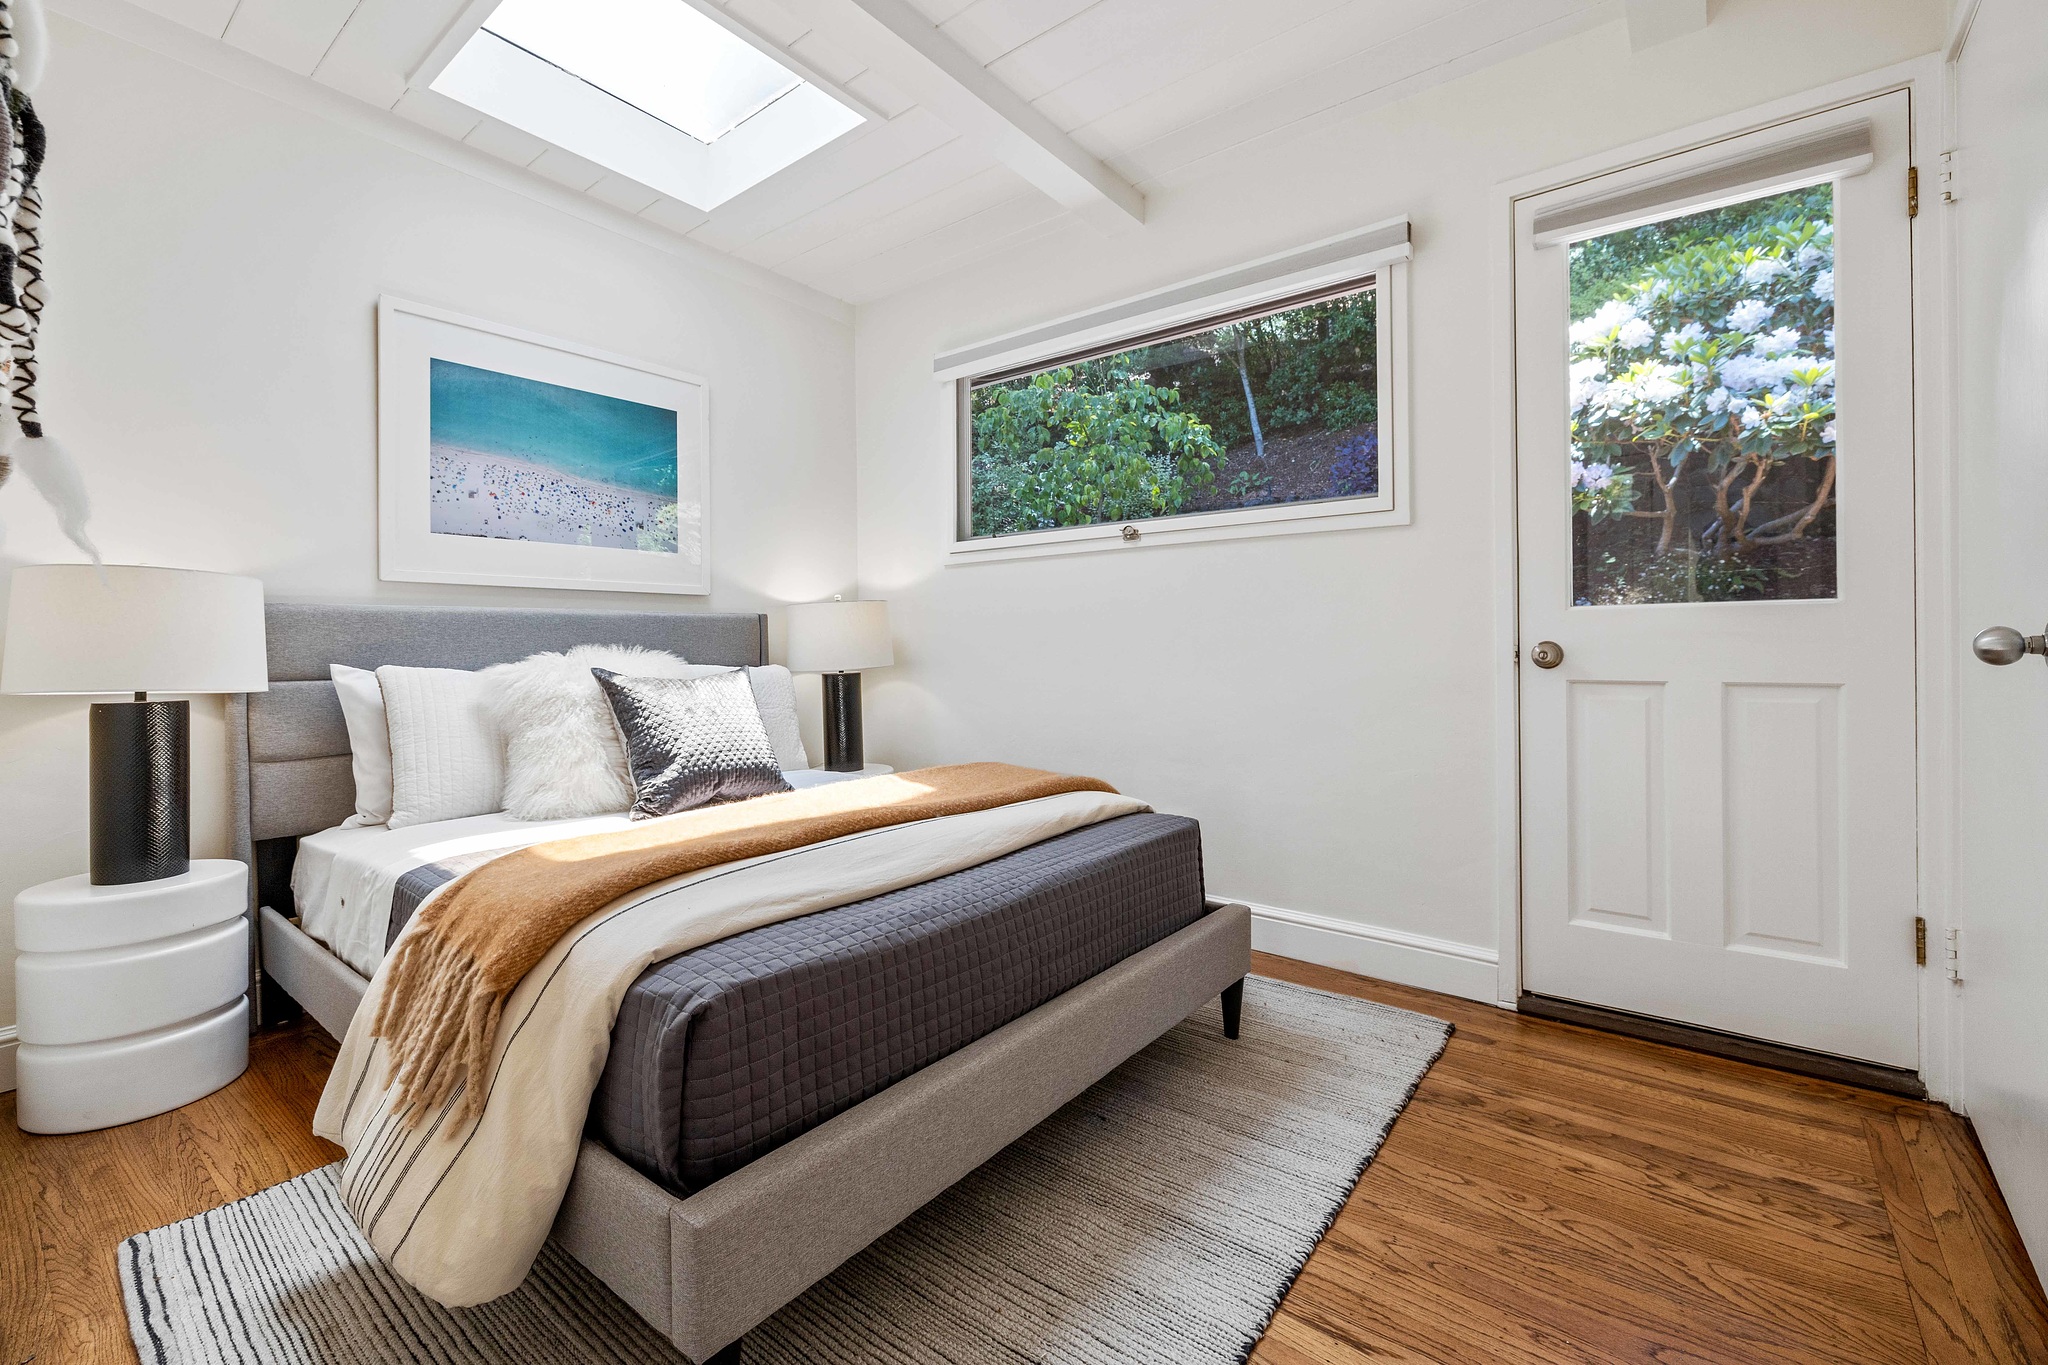 Second bedroom with skylight and refinished wood floors